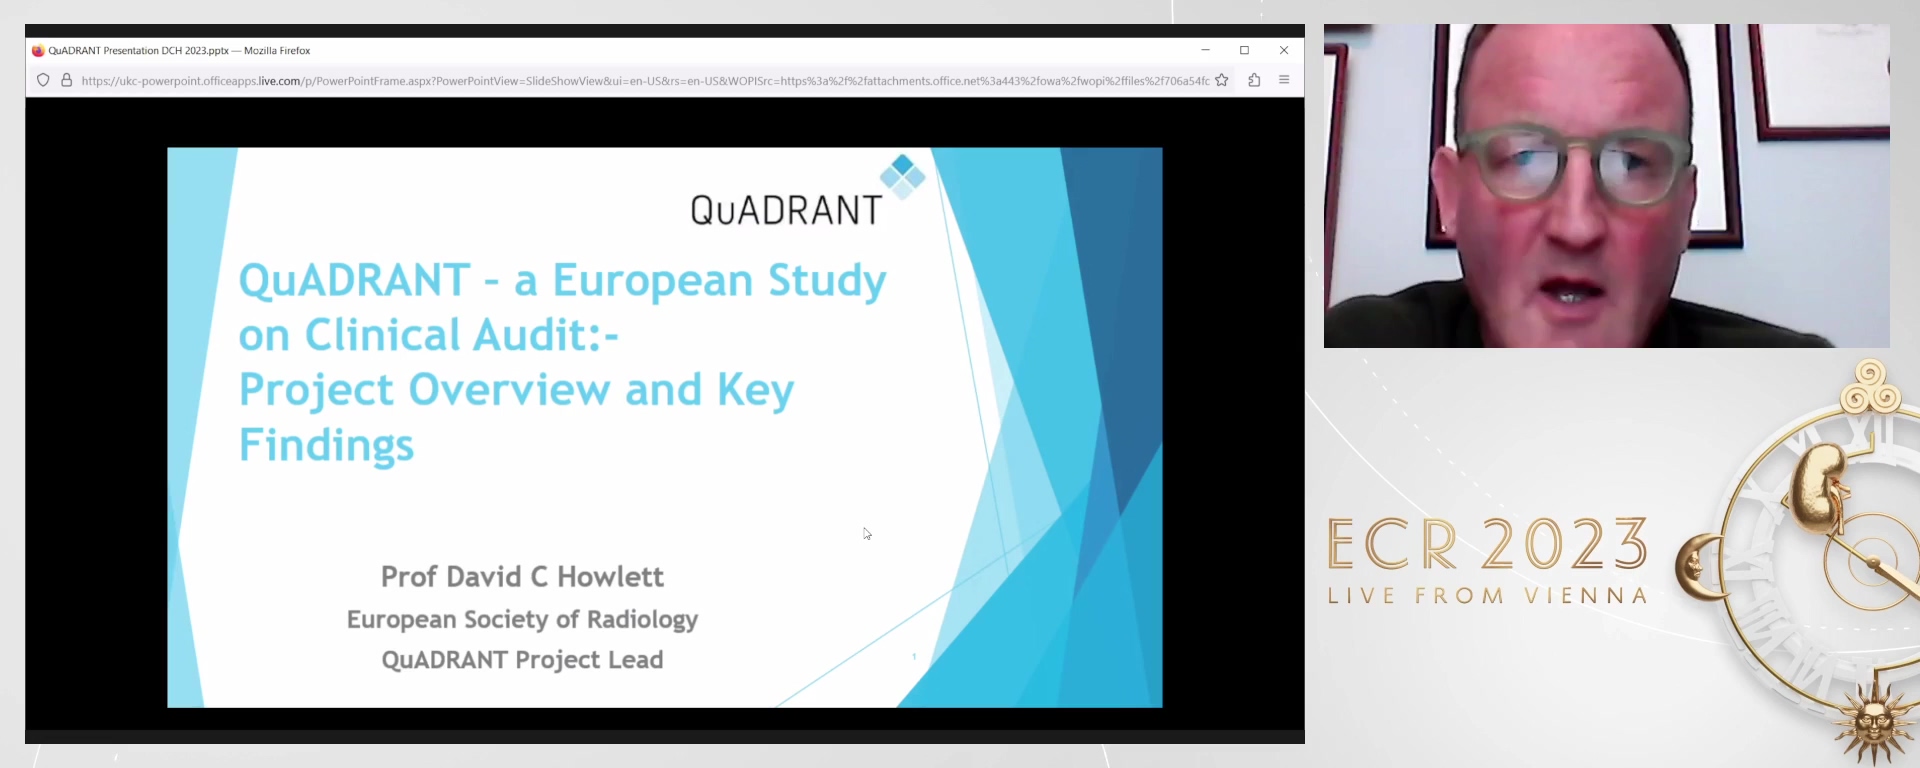 QUADRANT: project overview and key findings - David  Howlett, Eastbourne / UK